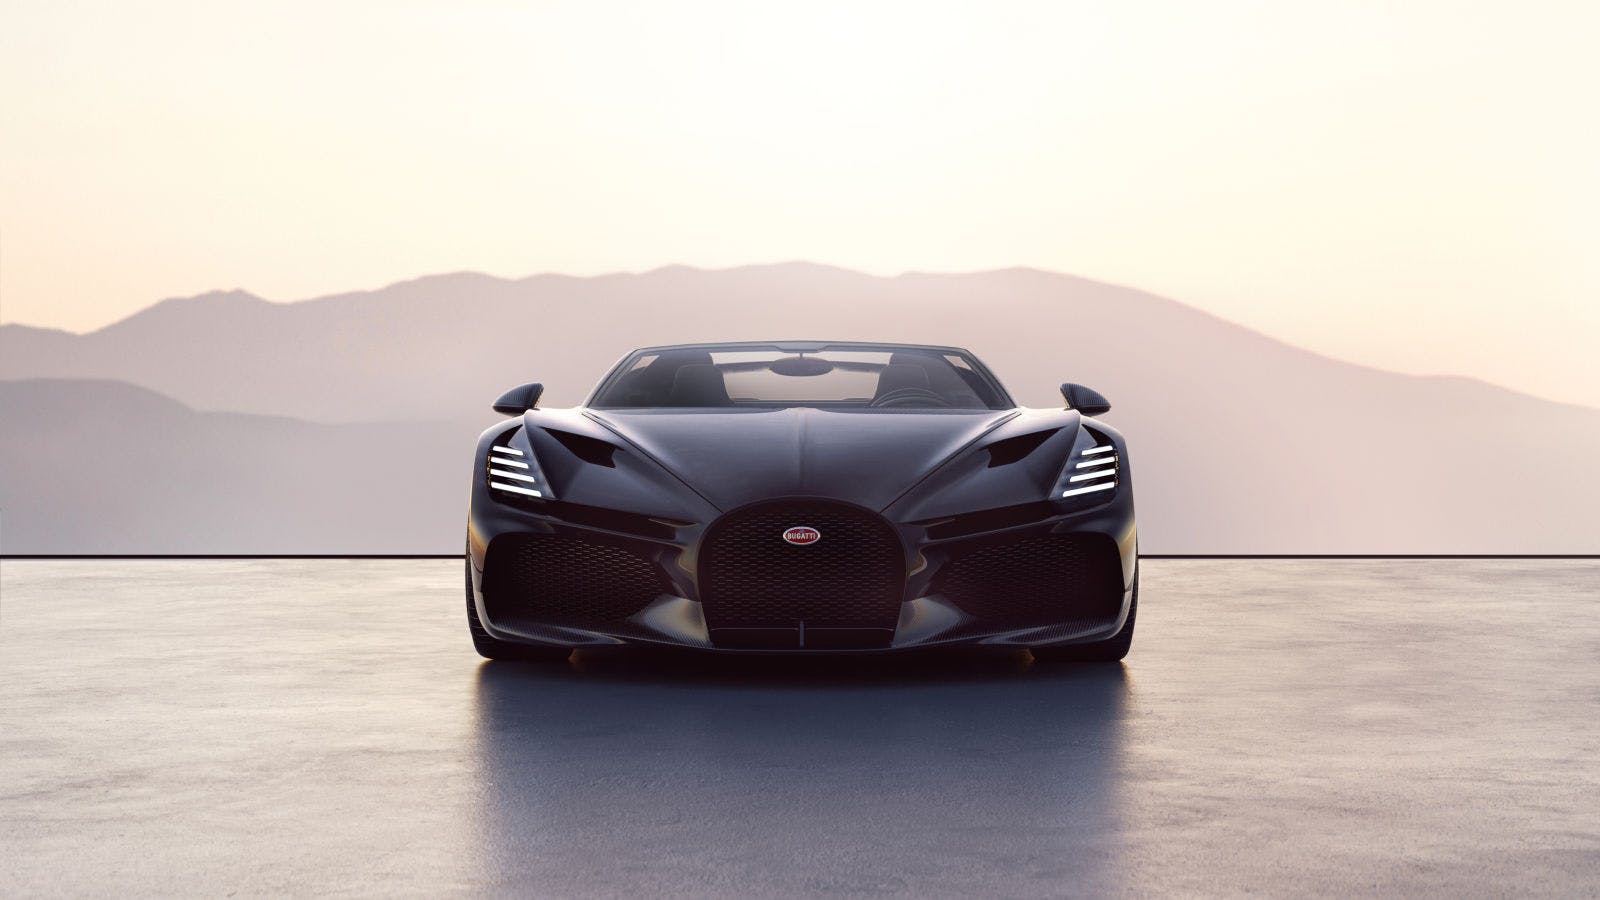 The new Bugatti W16 Mistral, unveiled on August 19 at The Quail, A Motorsports Gathering during Monterey Car Week in California.